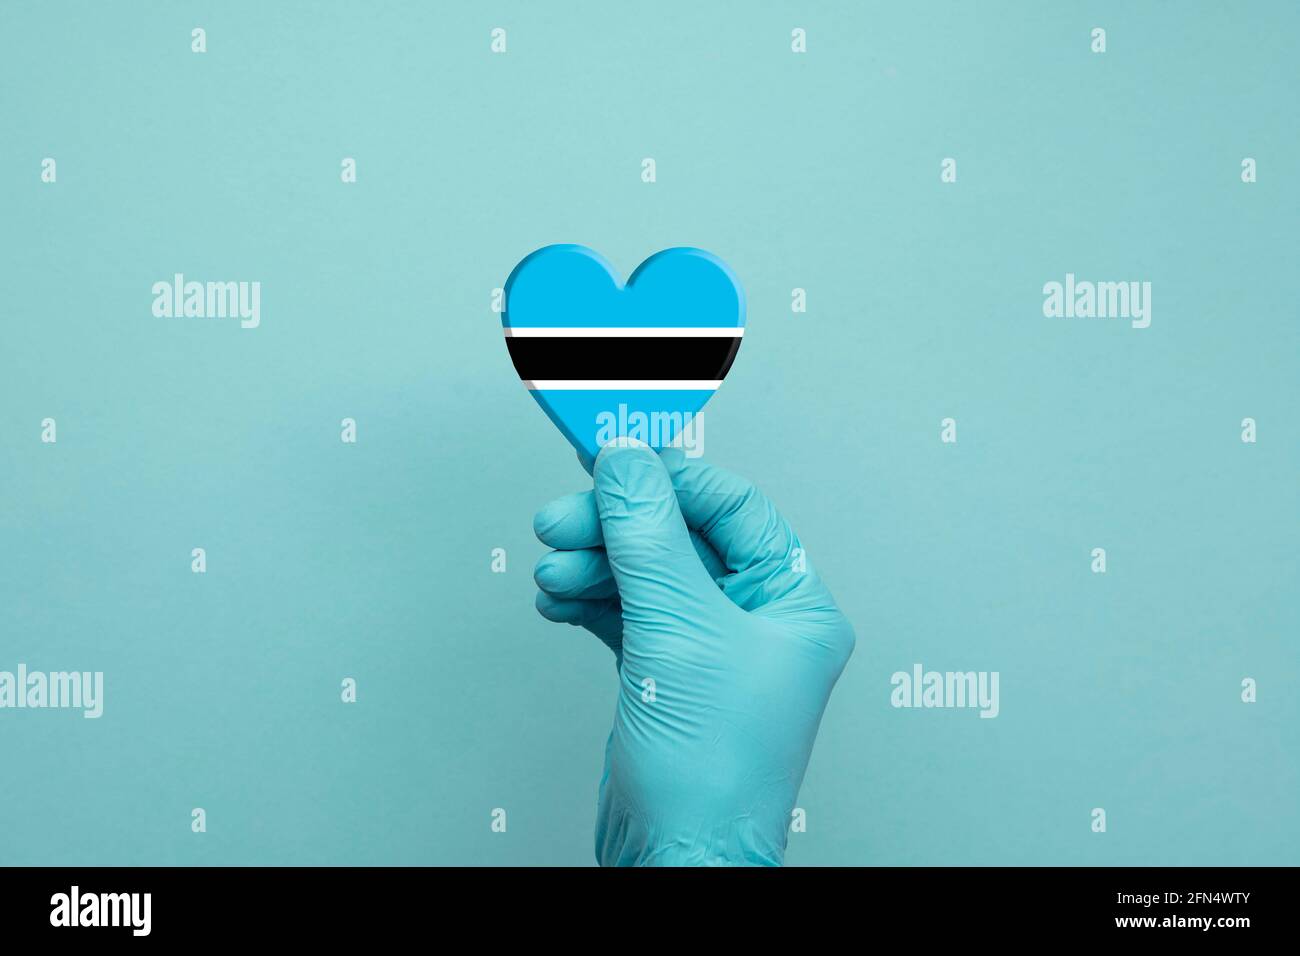 Hands wearing protective surgical gloves holding Botswana flag heart Stock Photo